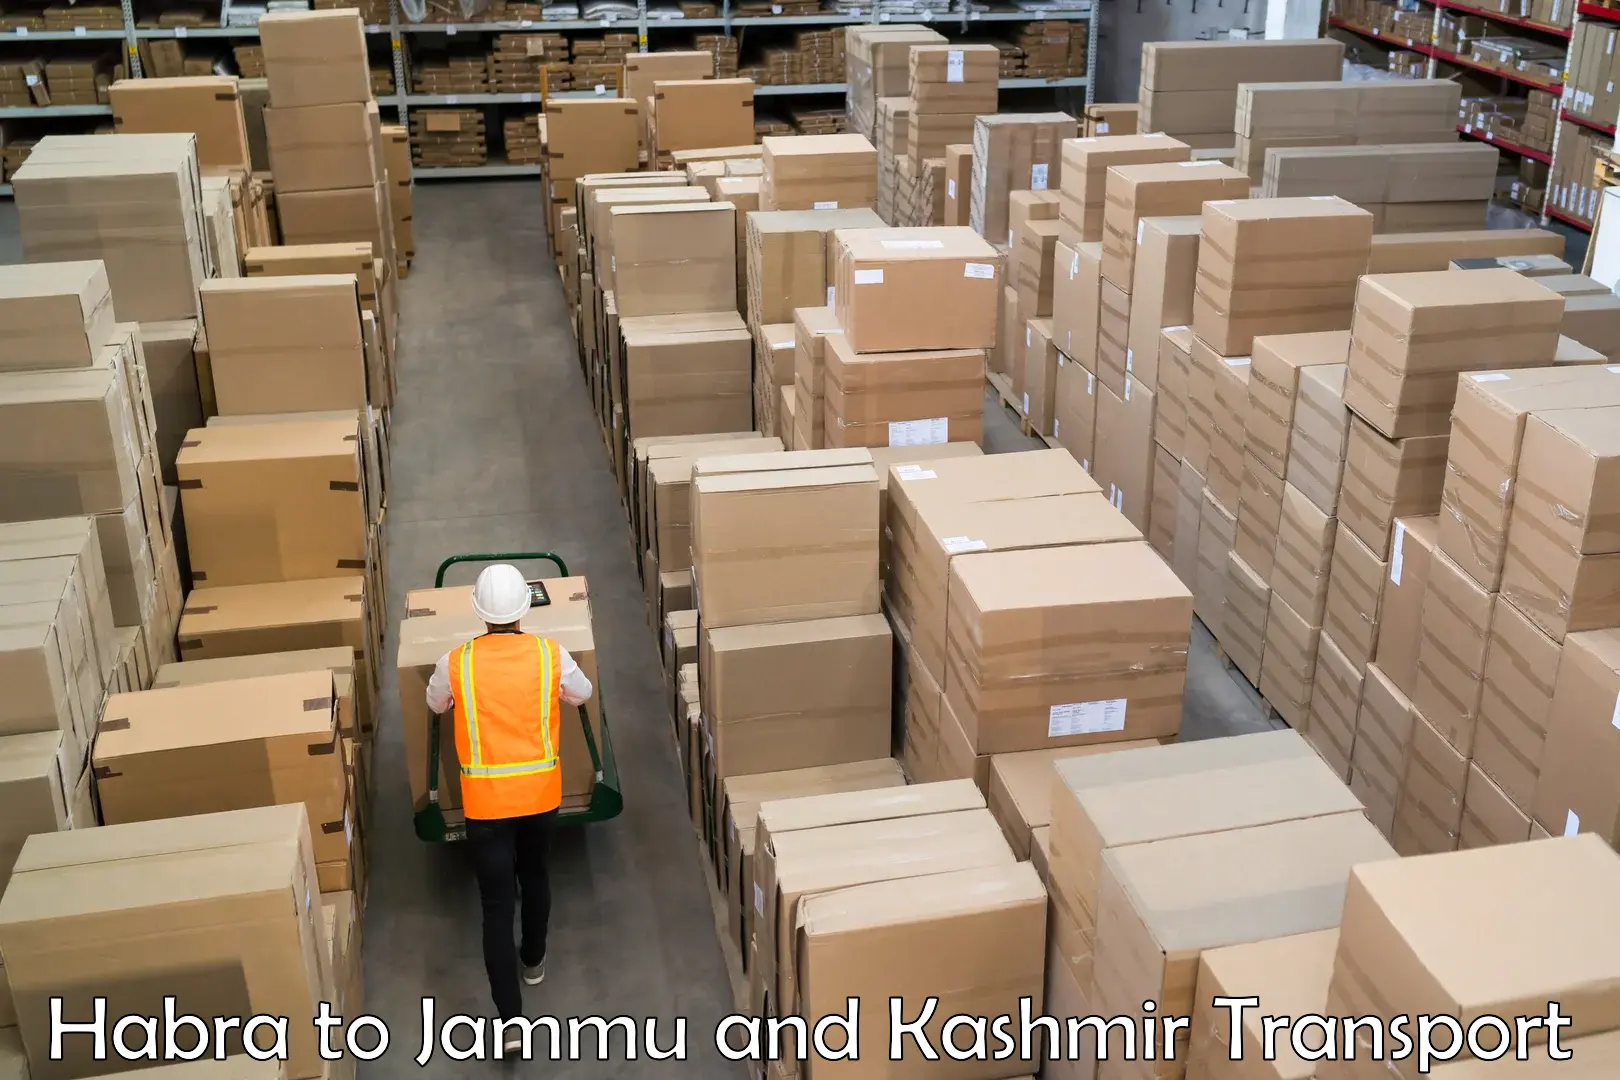 Container transport service Habra to Jammu and Kashmir